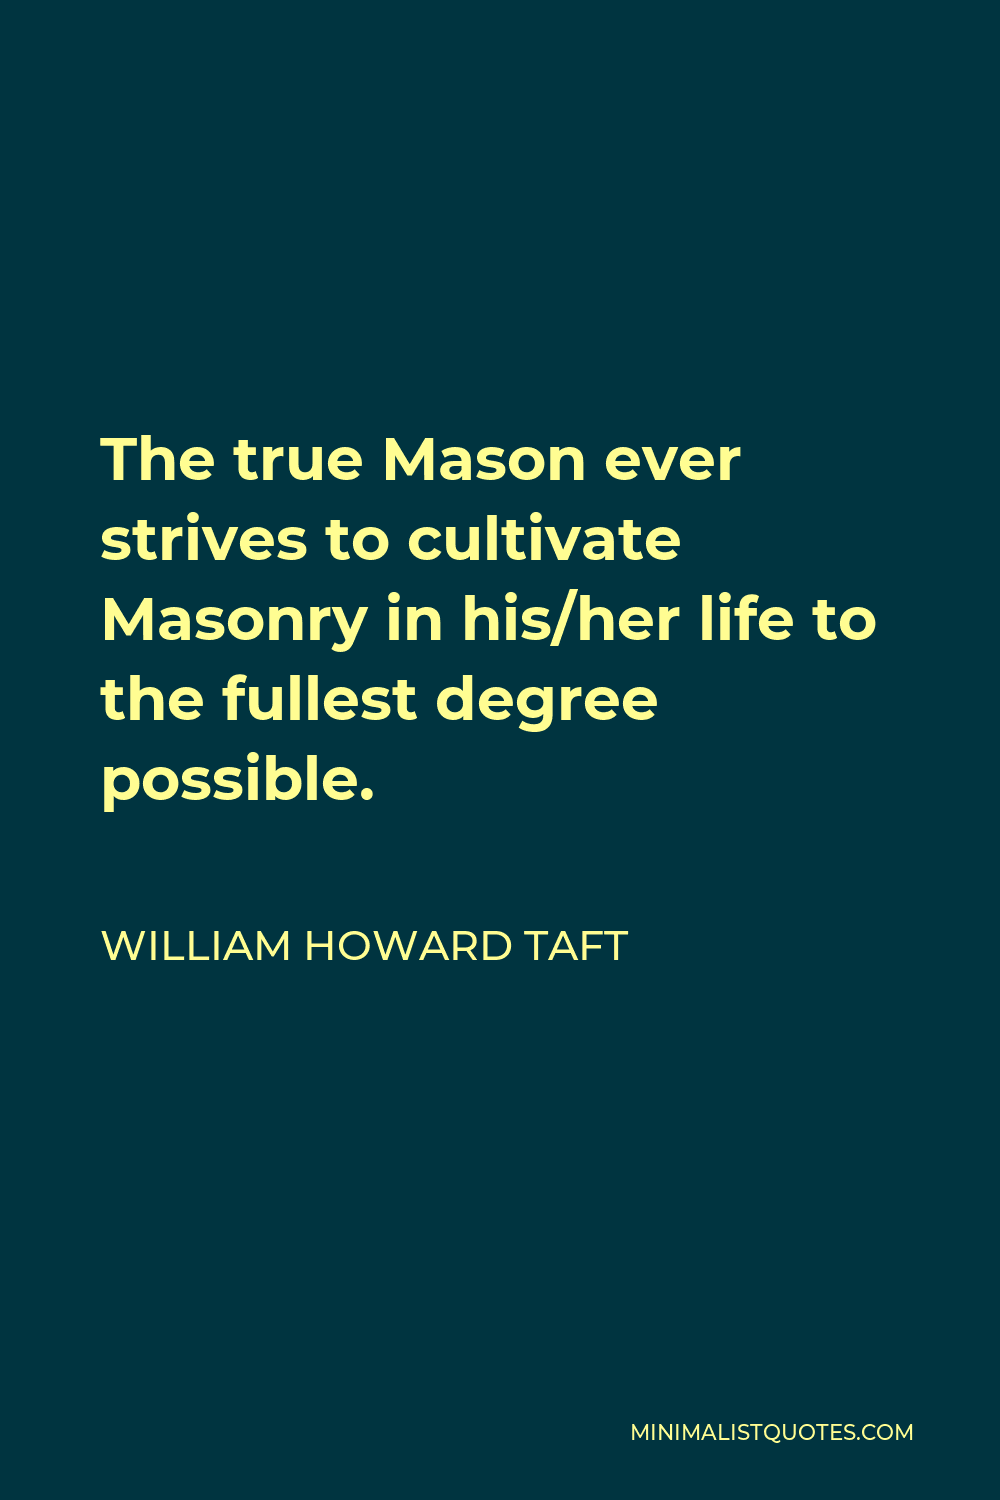 William Howard Taft Quote - The true Mason ever strives to cultivate Masonry in his/her life to the fullest degree possible.